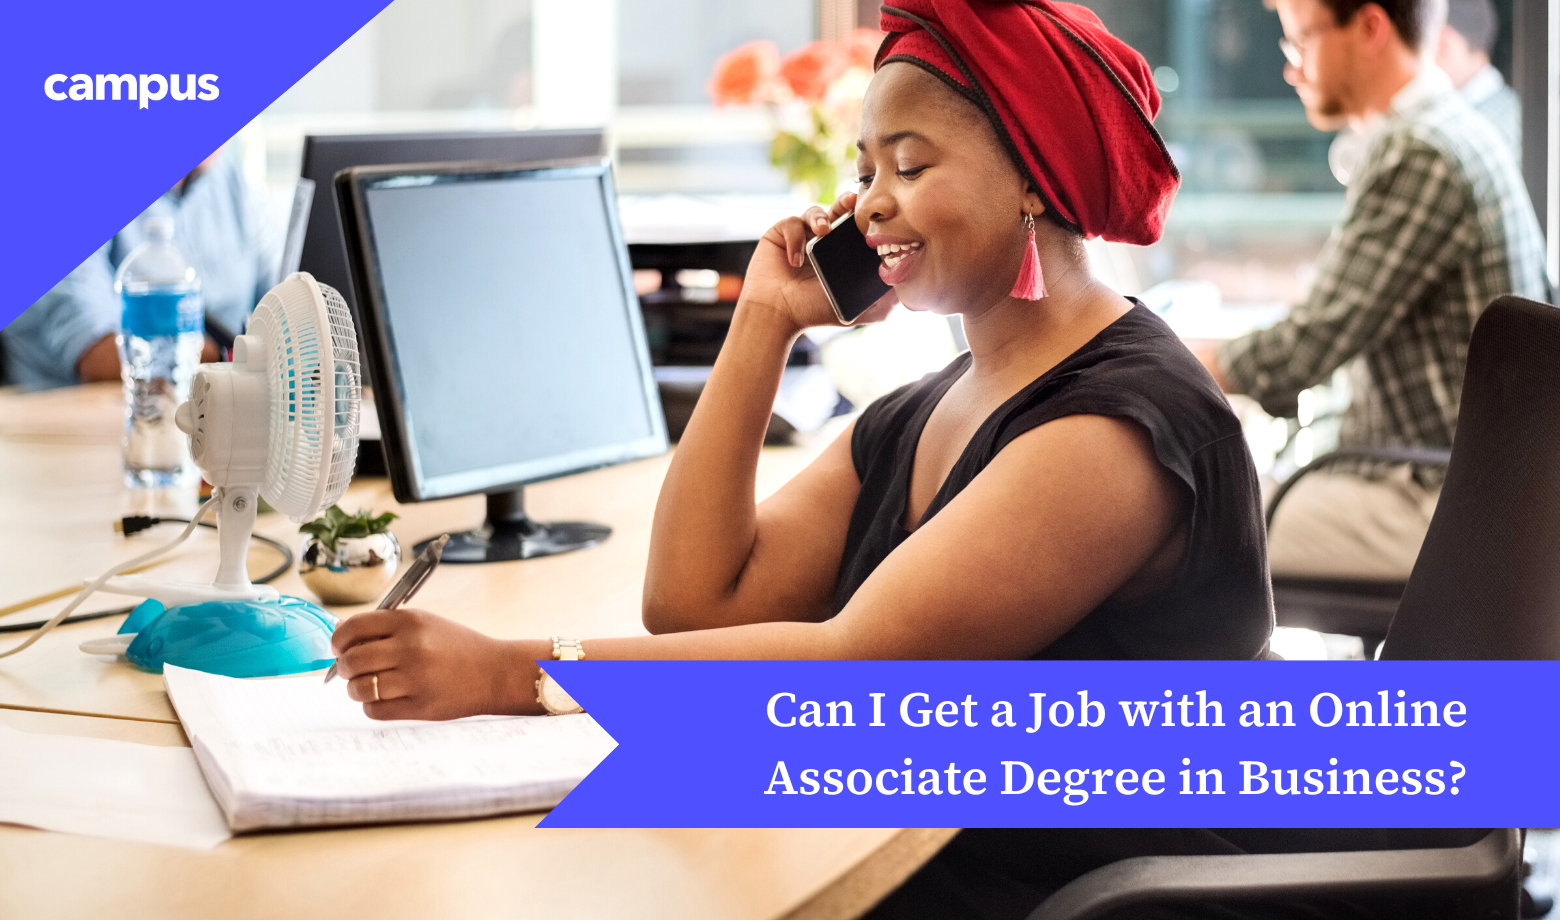 Can I Get a Job with an Online Associate Degree in Business?